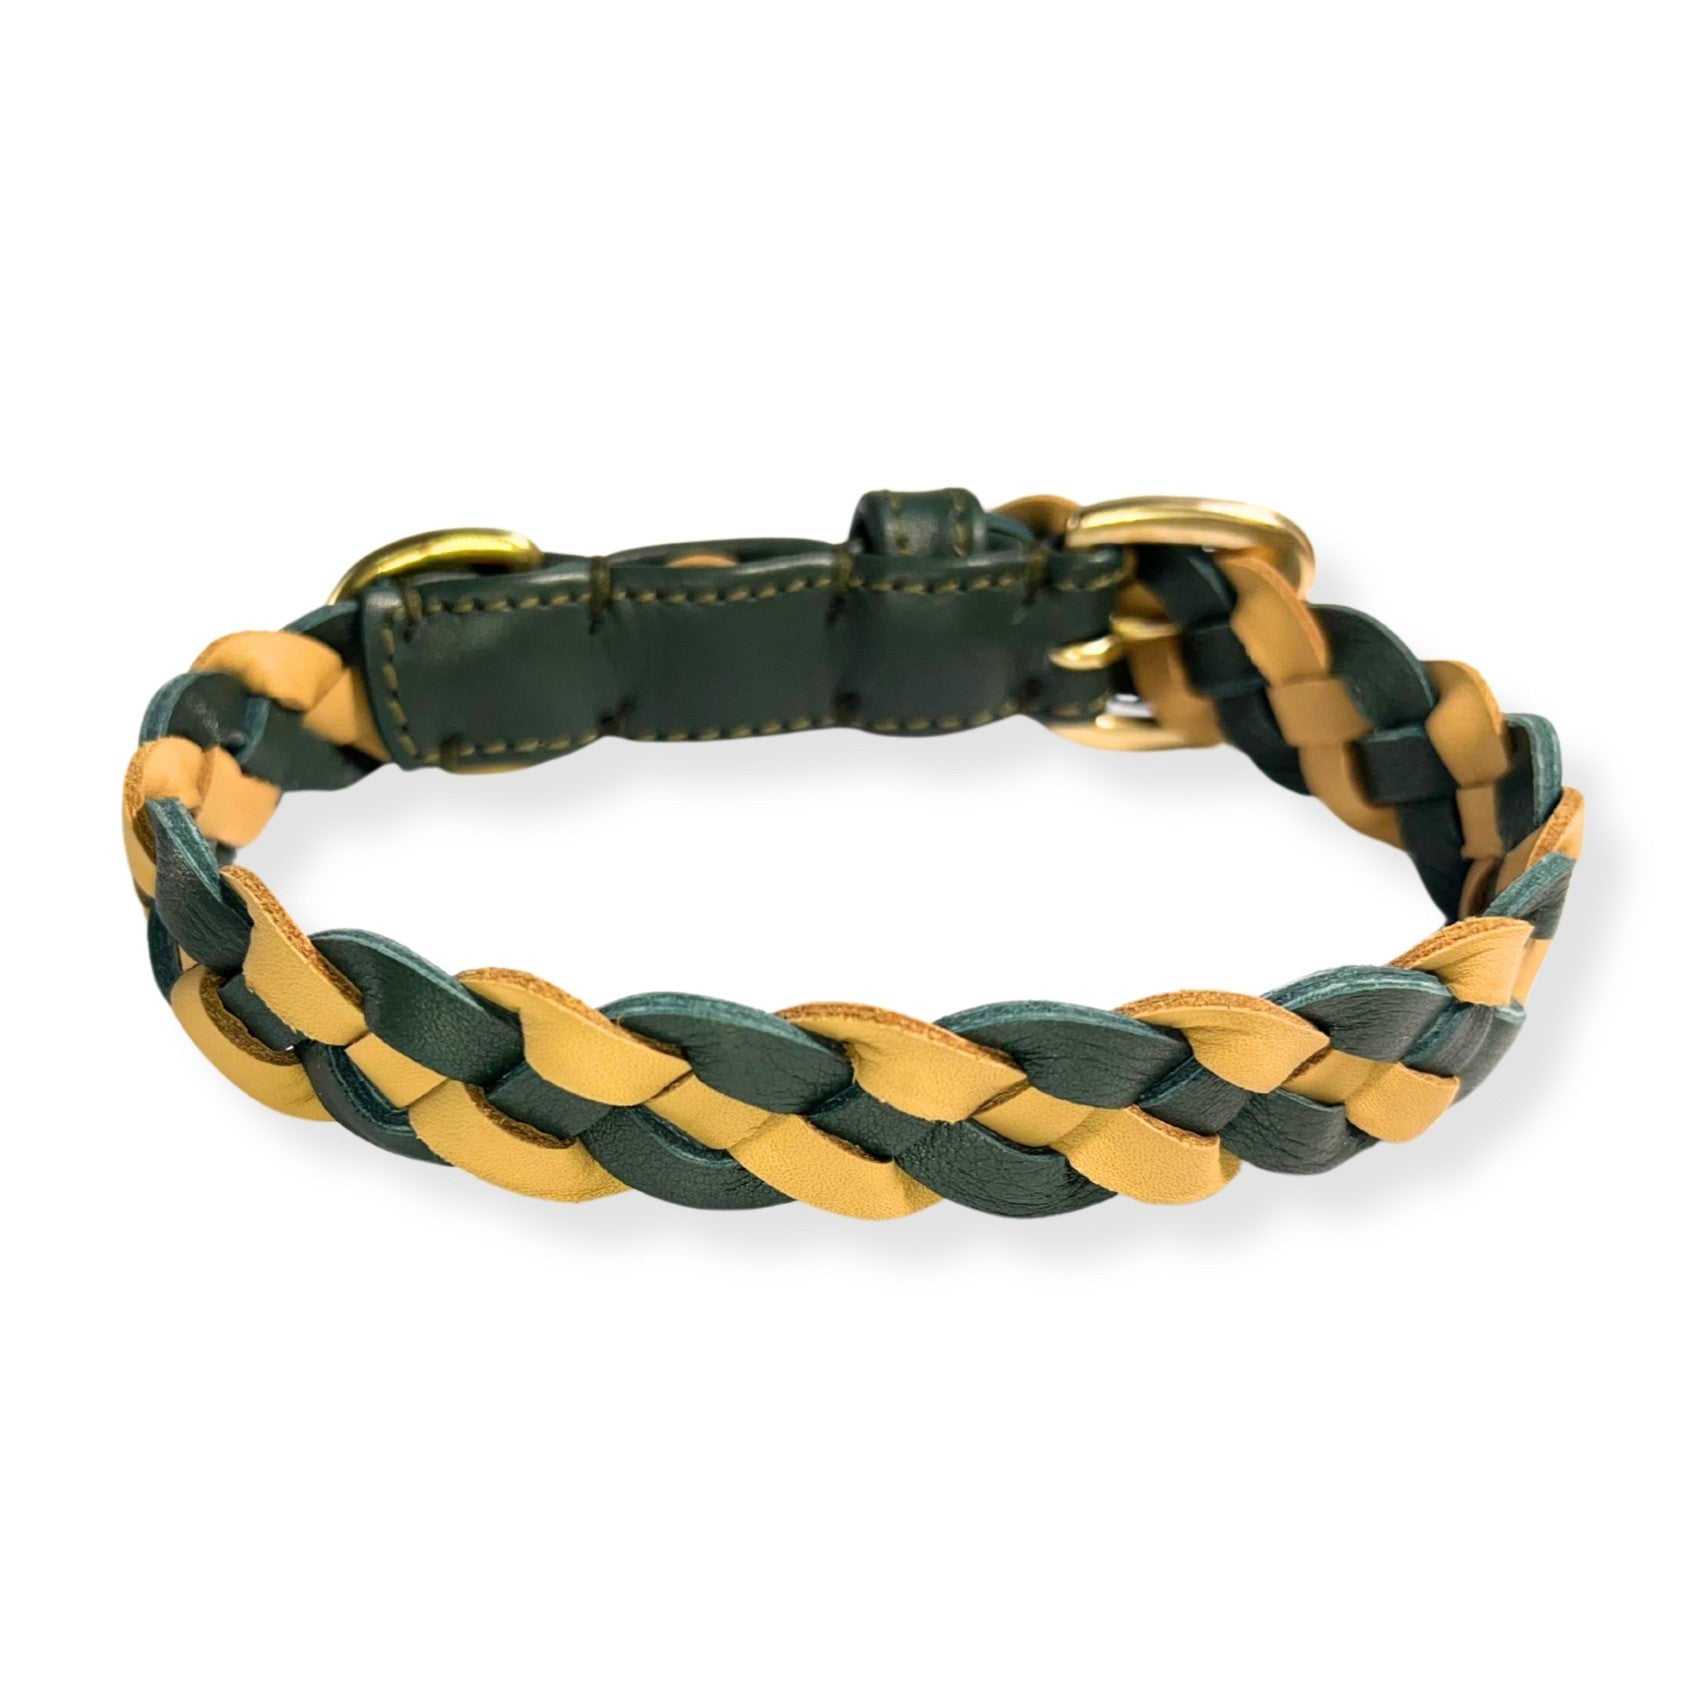 A LuLu Collar - chive featuring green and yellow strands, with a loop and knot closure, displaying a casual yet stylish accessory isolated on a white background by Georgie Paws.